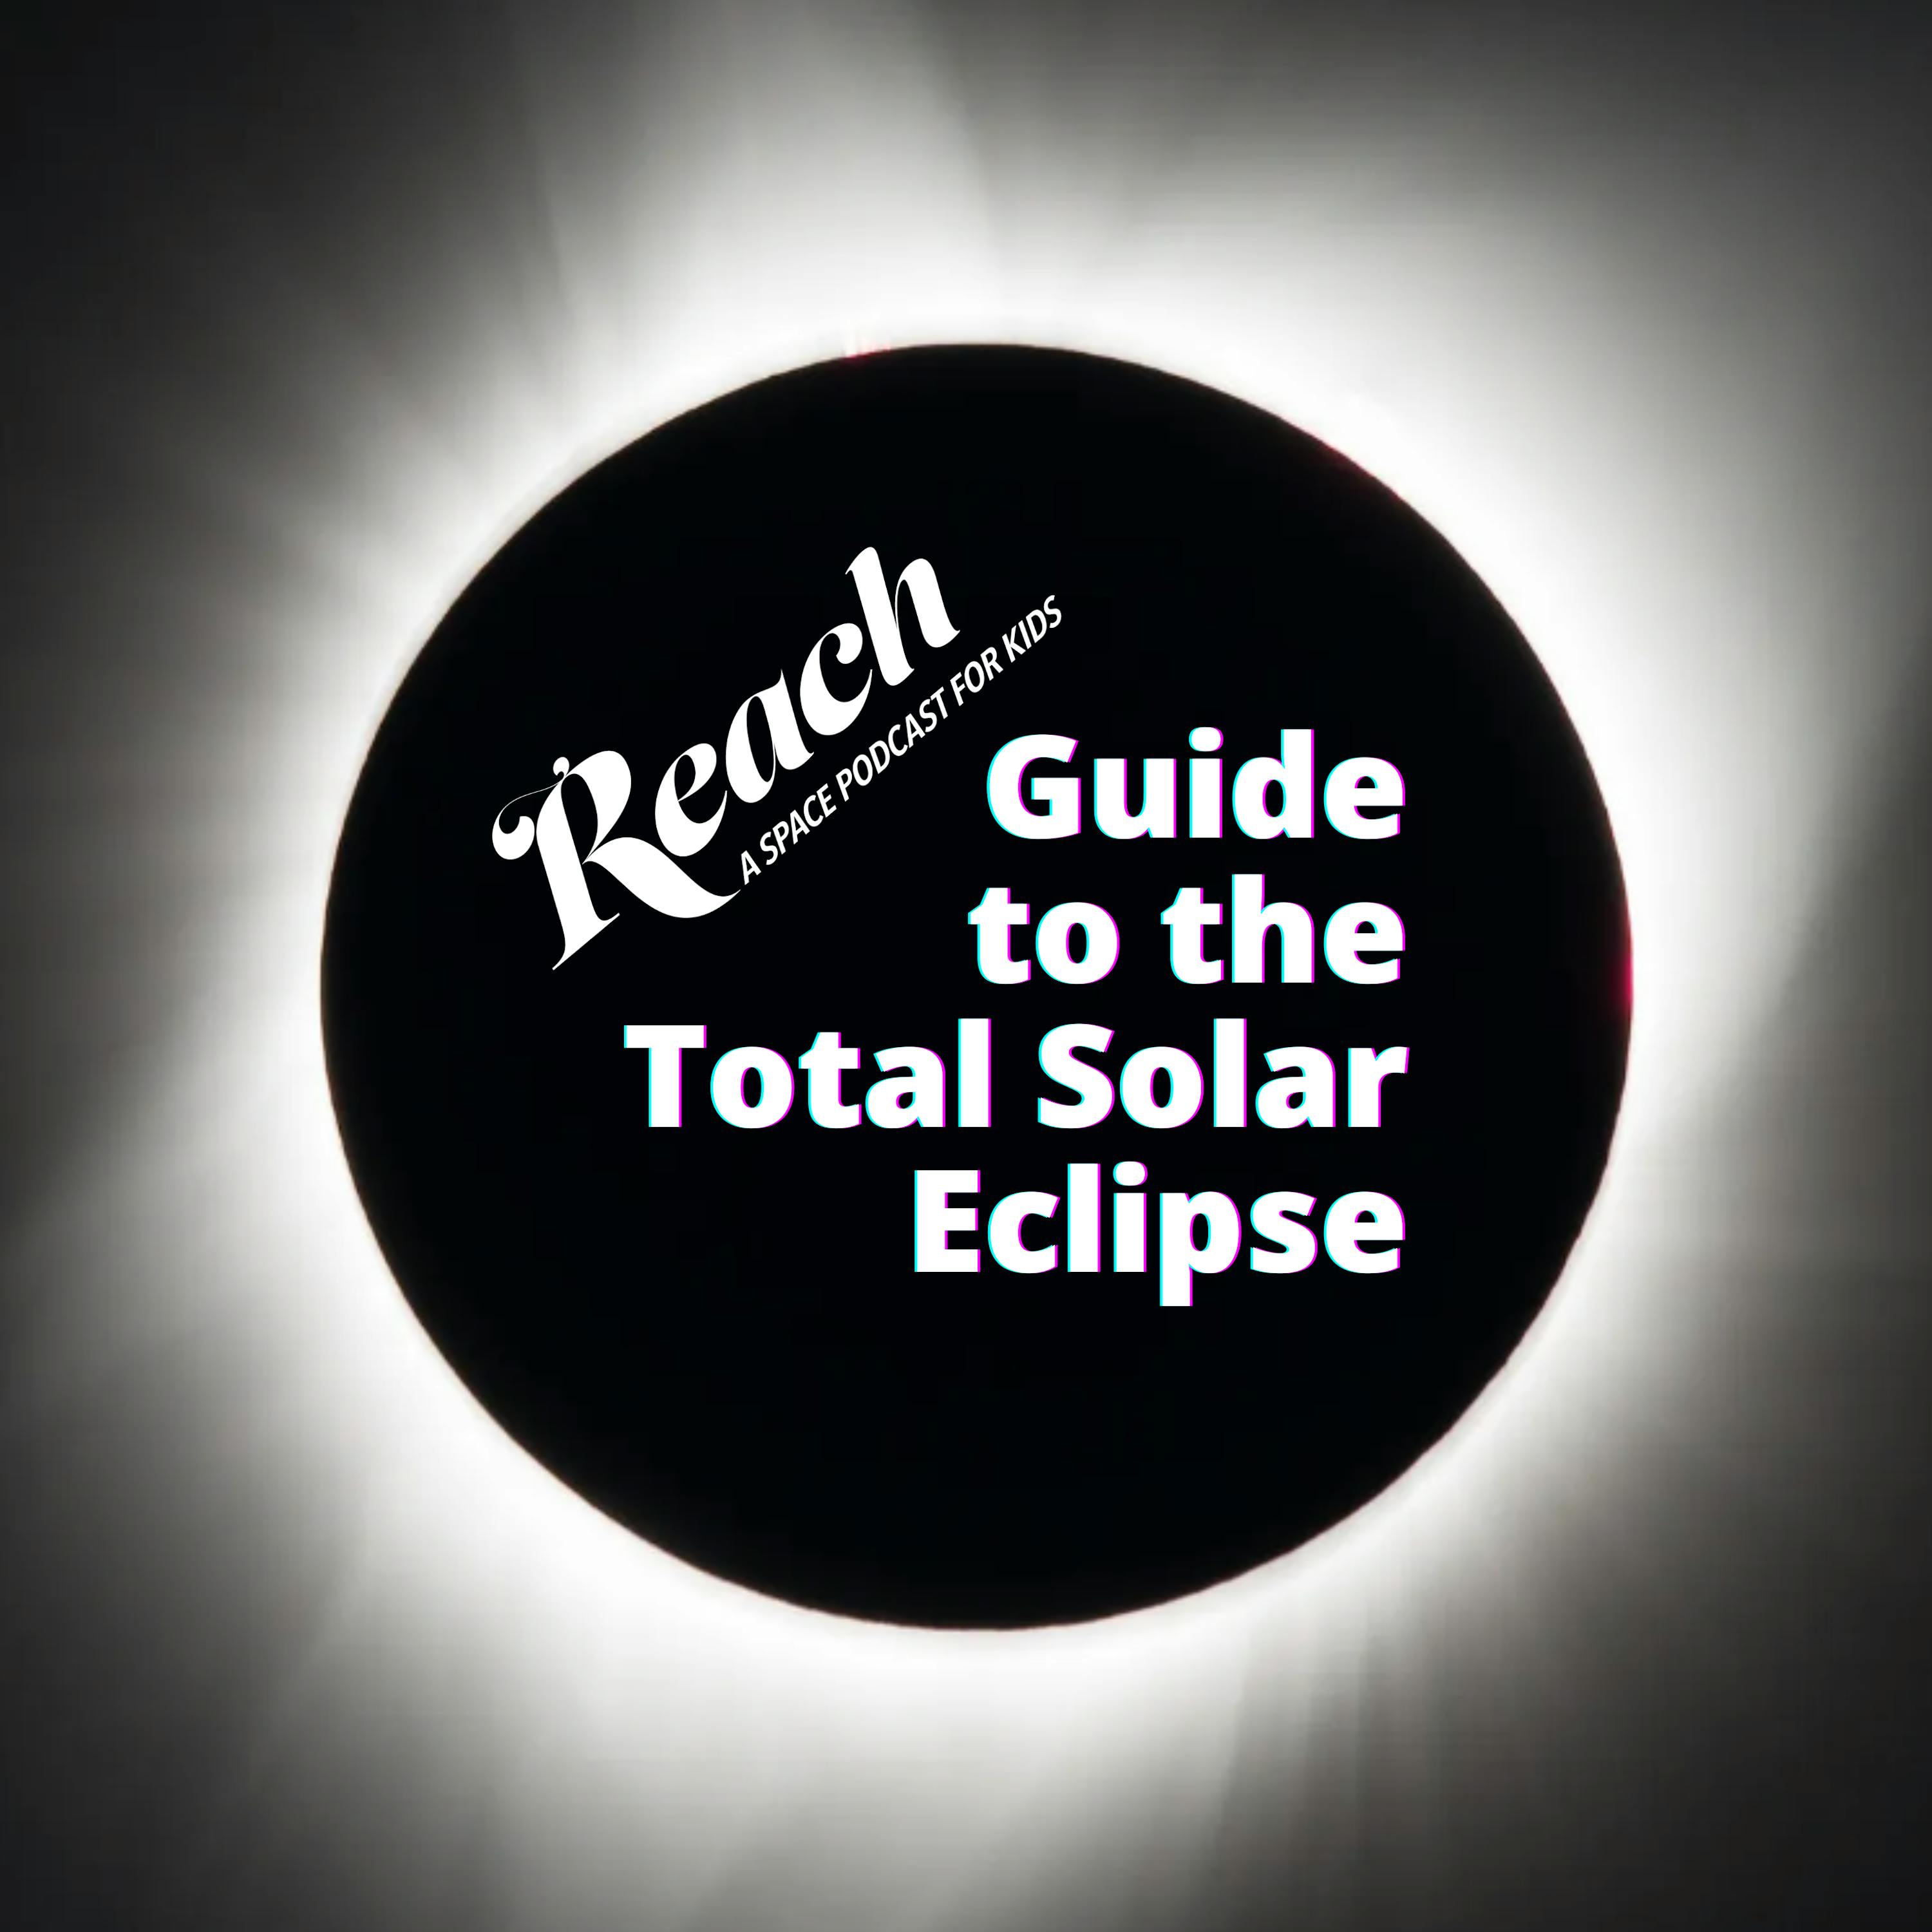 The REACH Guide to the Total Solar Eclipse